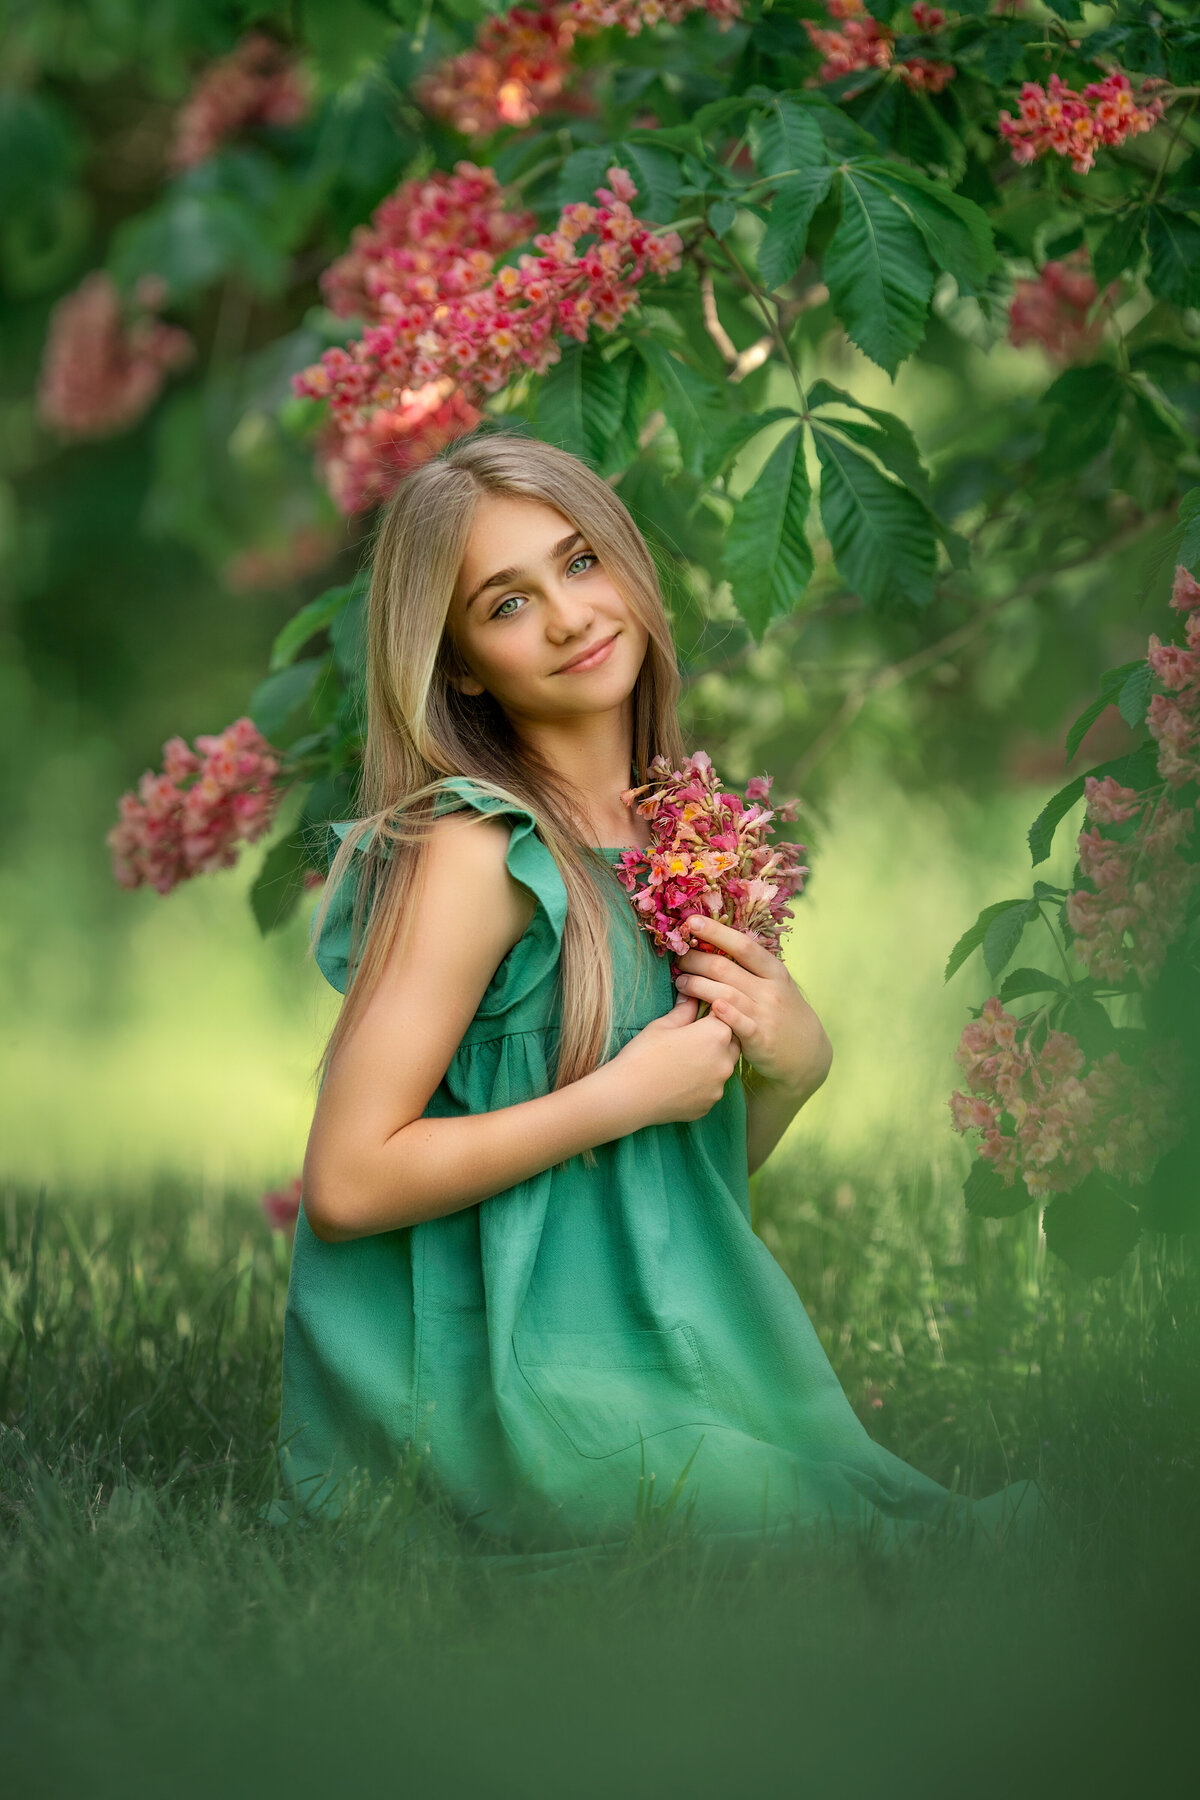 big green eye blond girl in mint color dress from Target is holding pink tree blossoms.